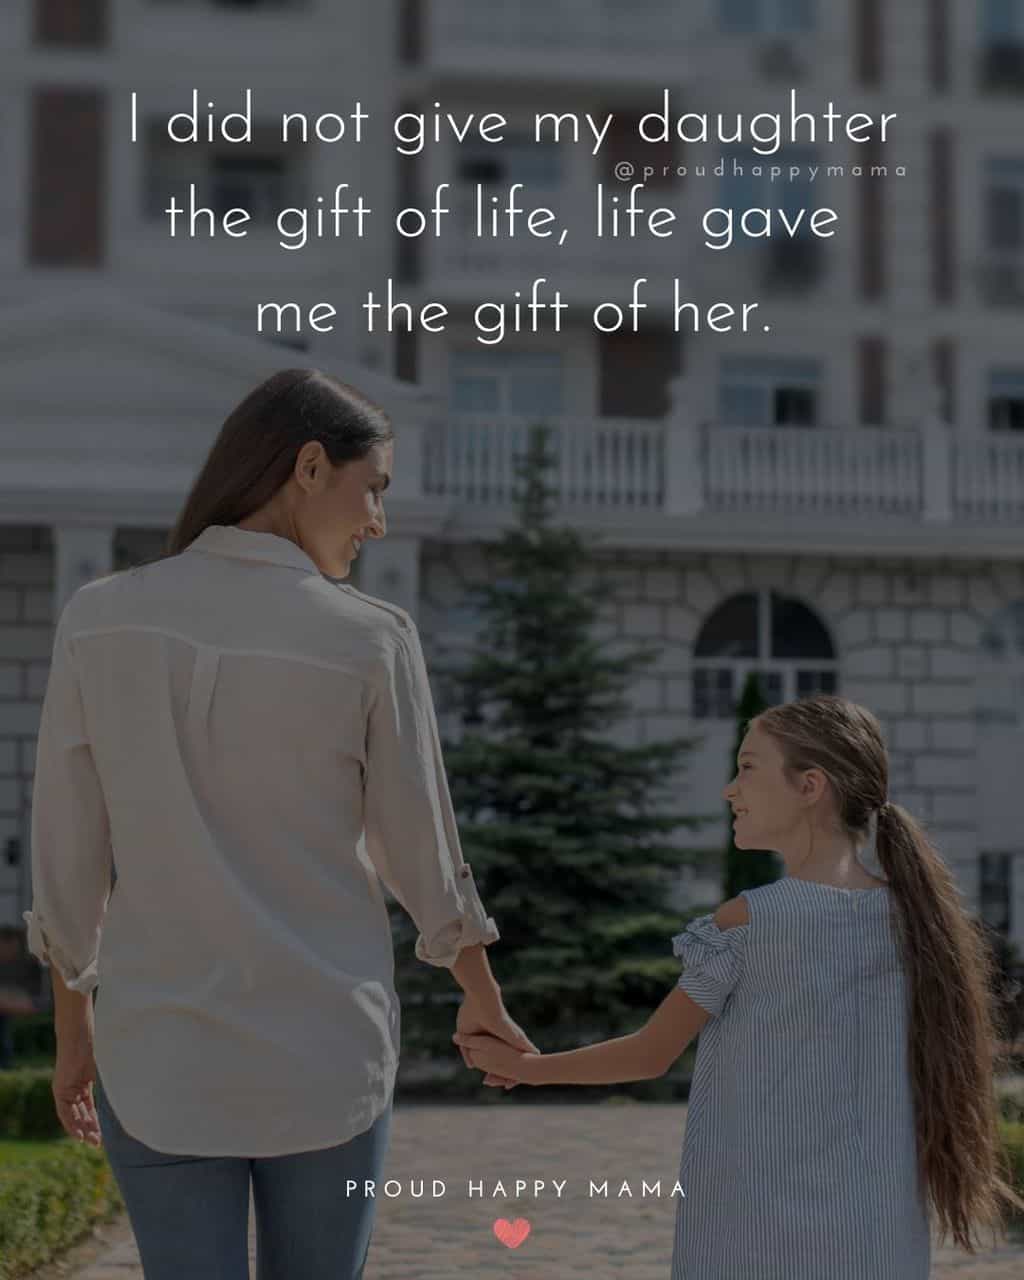 best quotes for daughter - ‘I did not give my daughter the gift of life, life gave me the gift of her.’